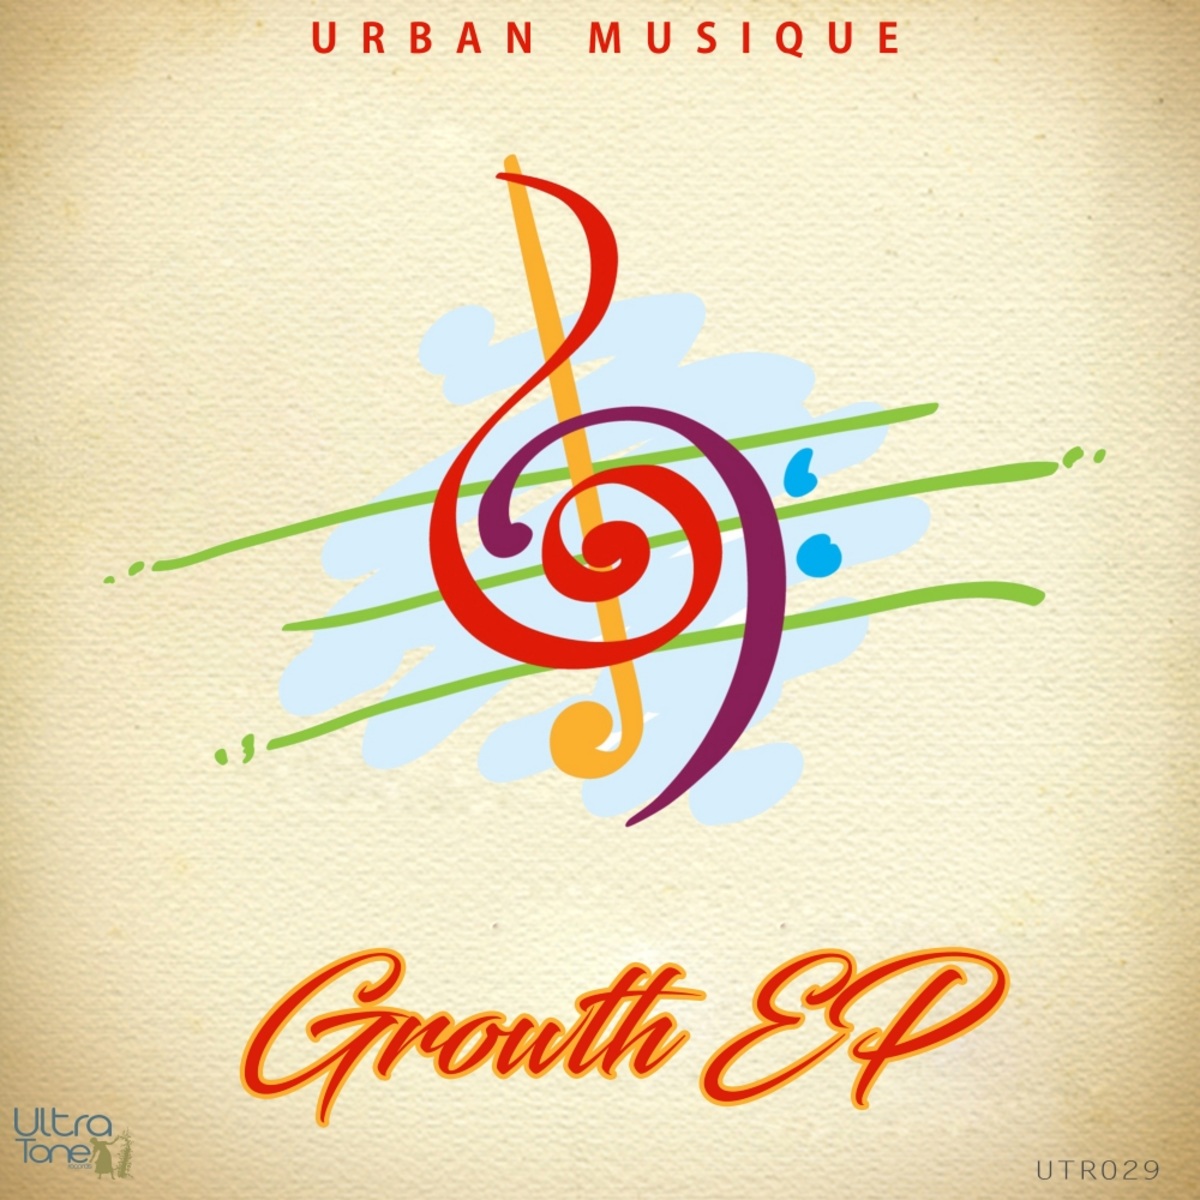 Urban Musique - Growth EP / Ultra Tone Records